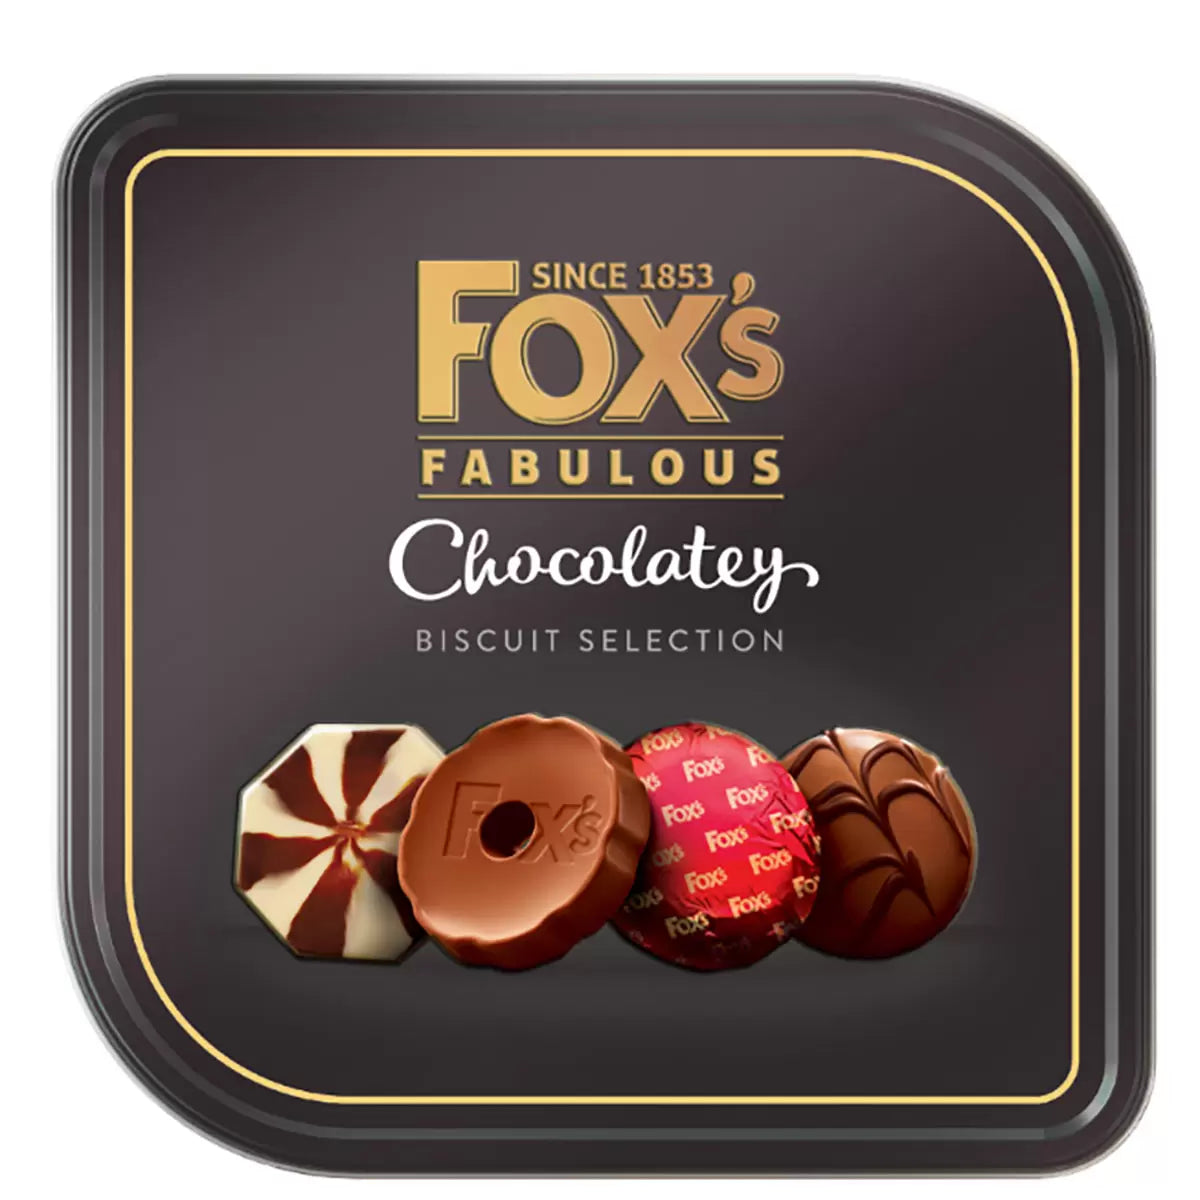 Chocolatey Biscuit Collection, Fox’s (730g)